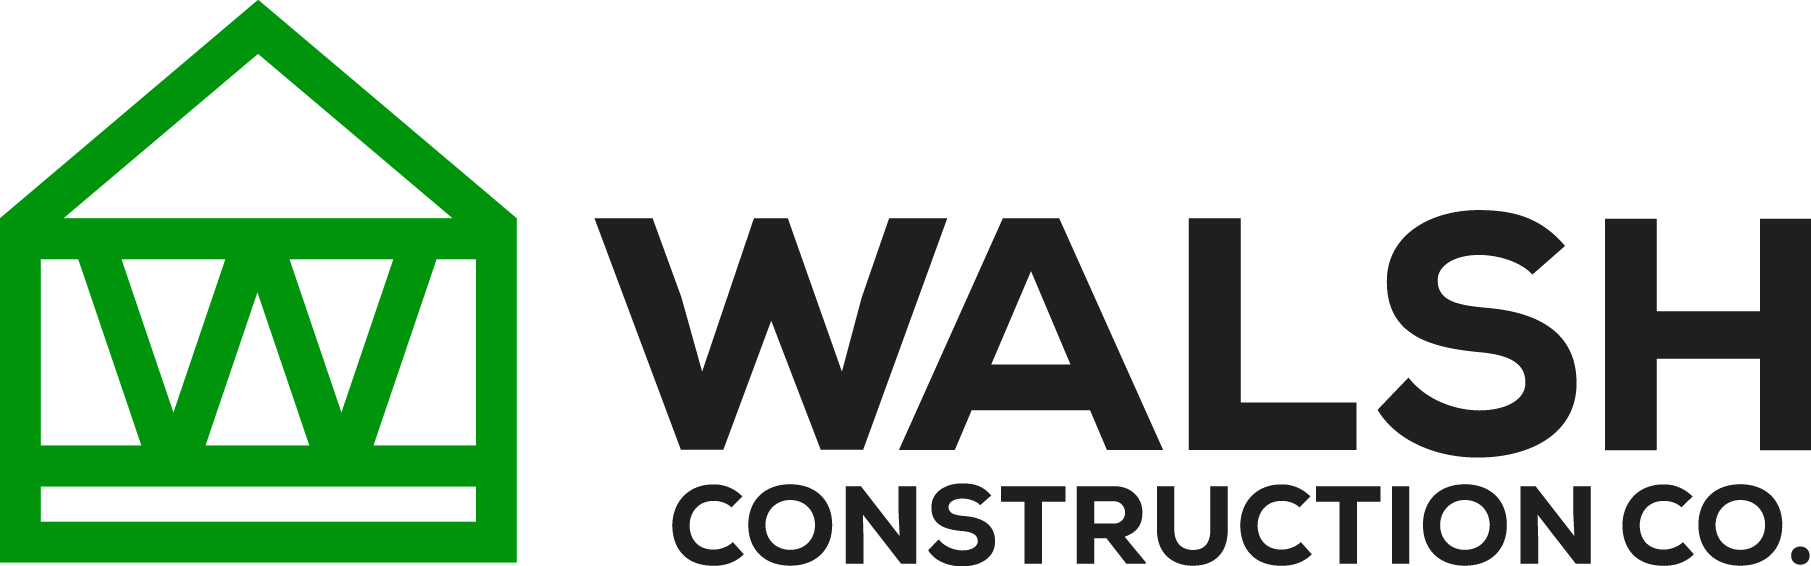 WALSH CONSTRUCTION CO. logo in dark grey lettering with a green graphic